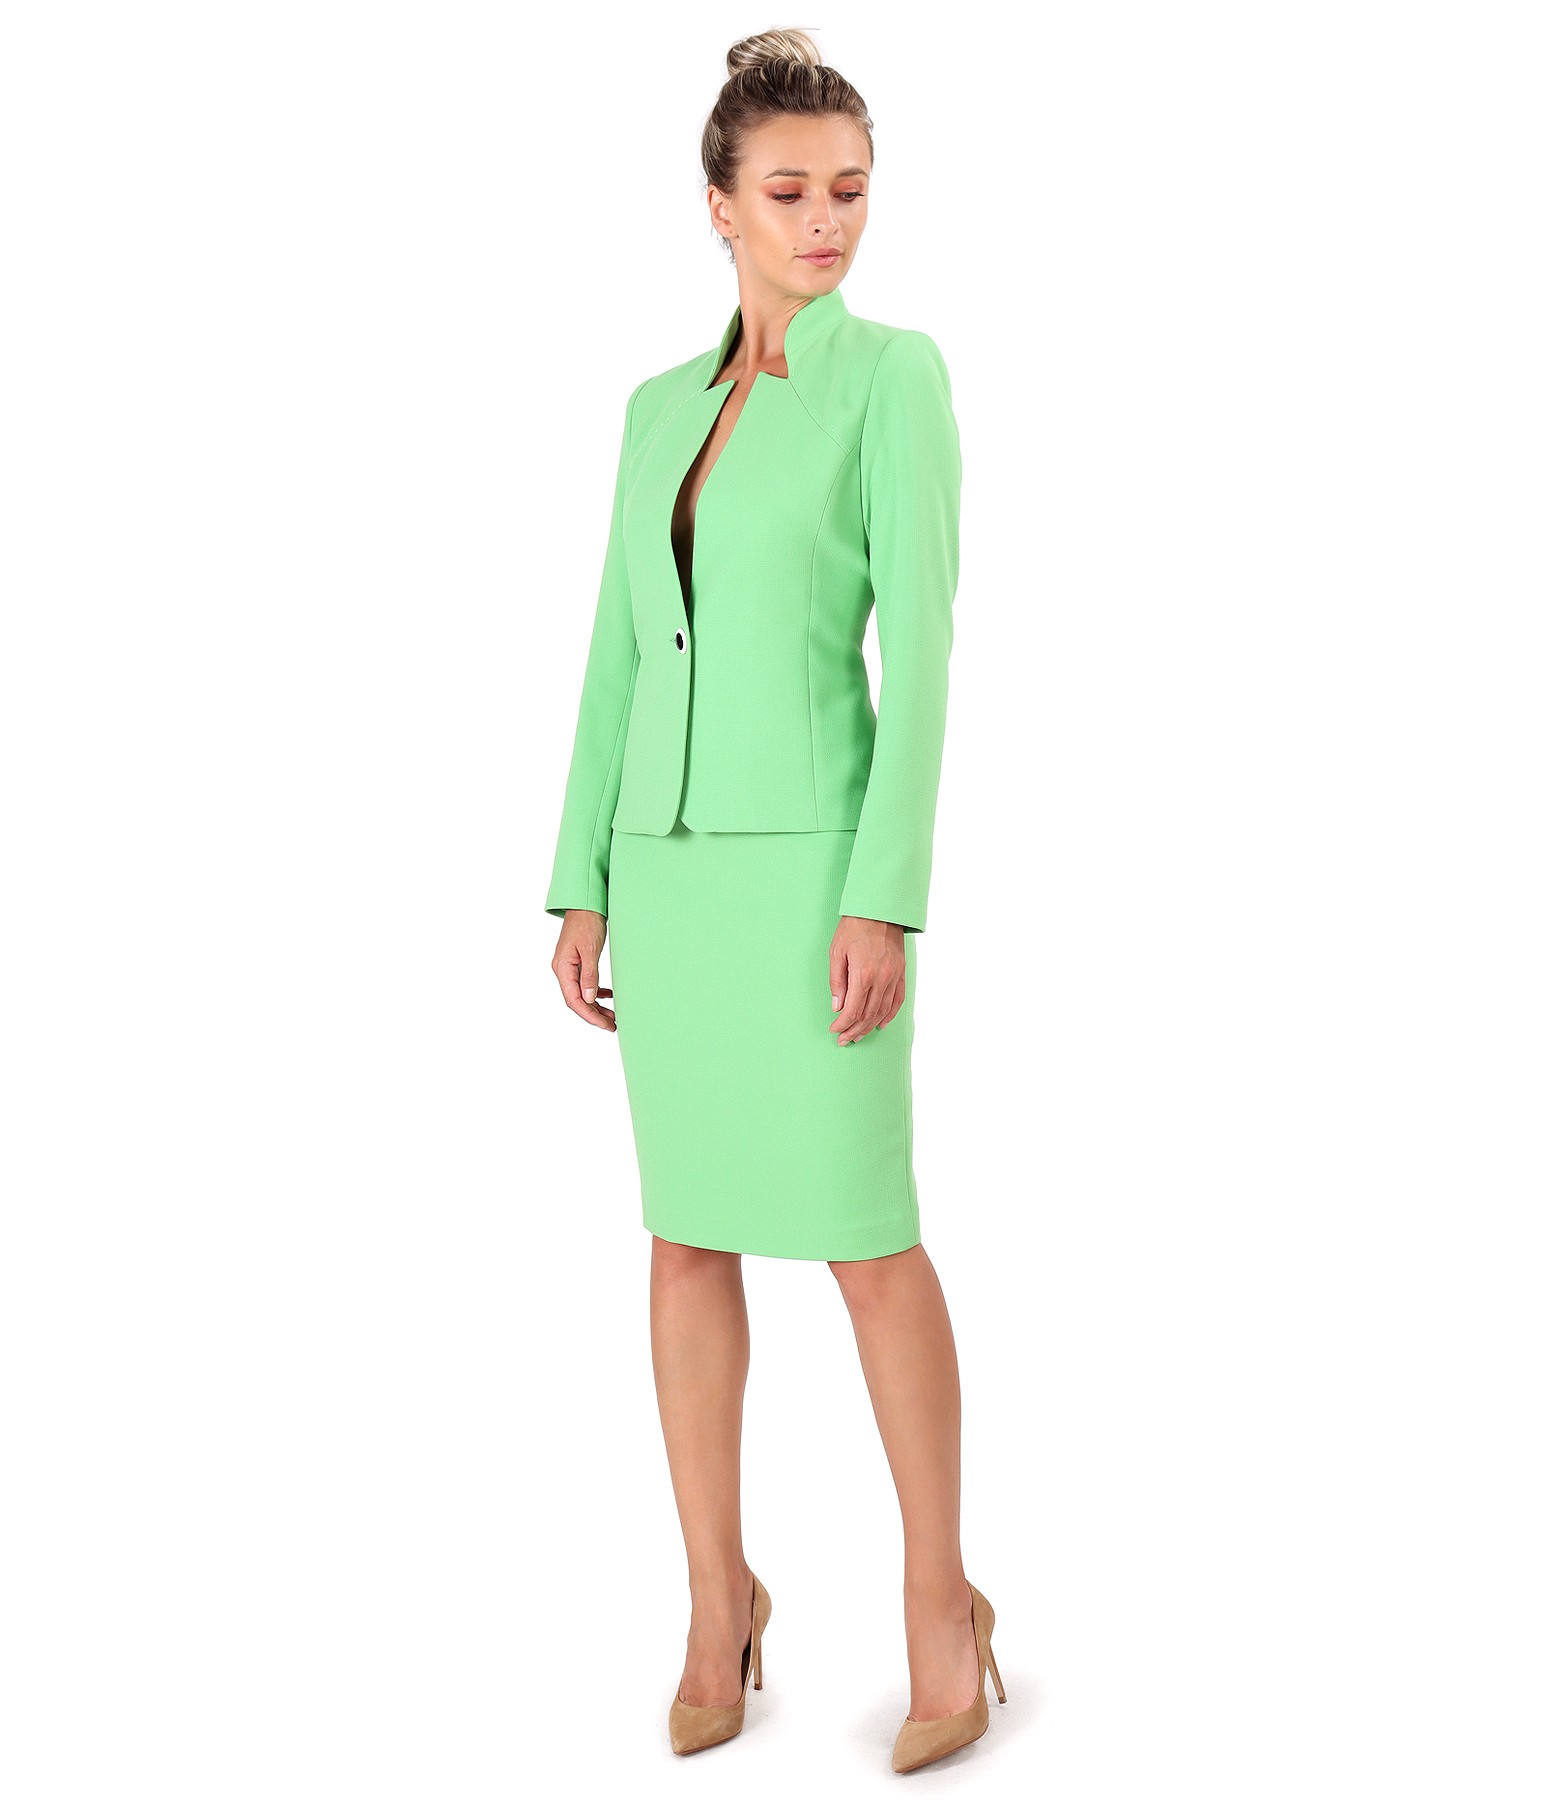 Office women suit with skirt and jacket made of elastic fabric - YOKKO